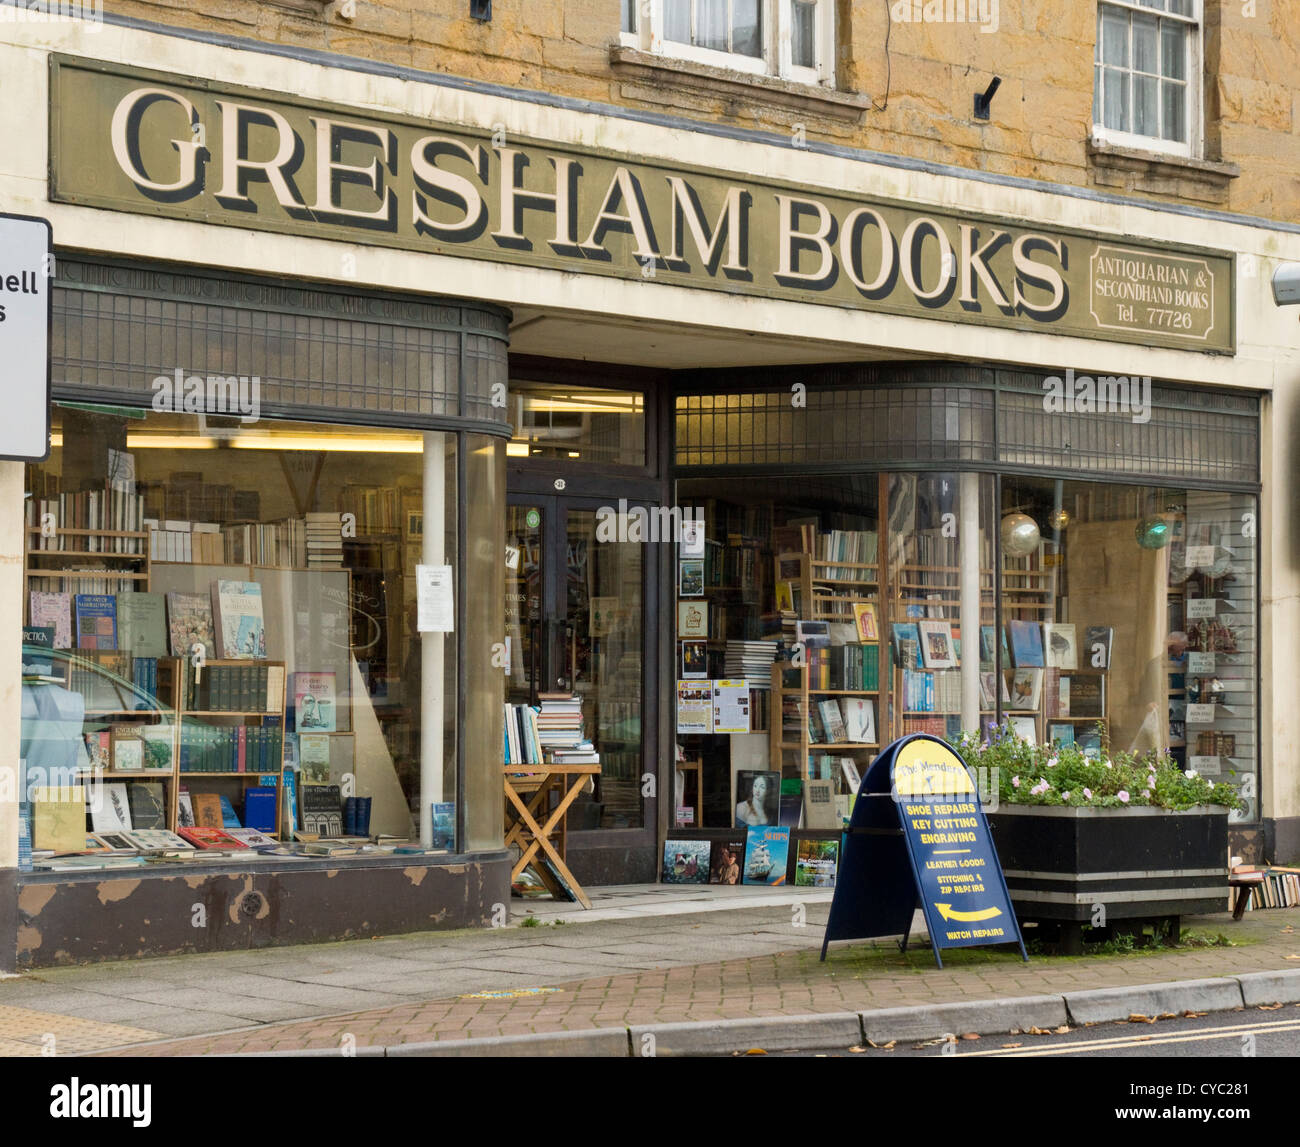 Gresham Books, an independent book seller. Crewkerene, a small town in Somerset England UK Stock Photo